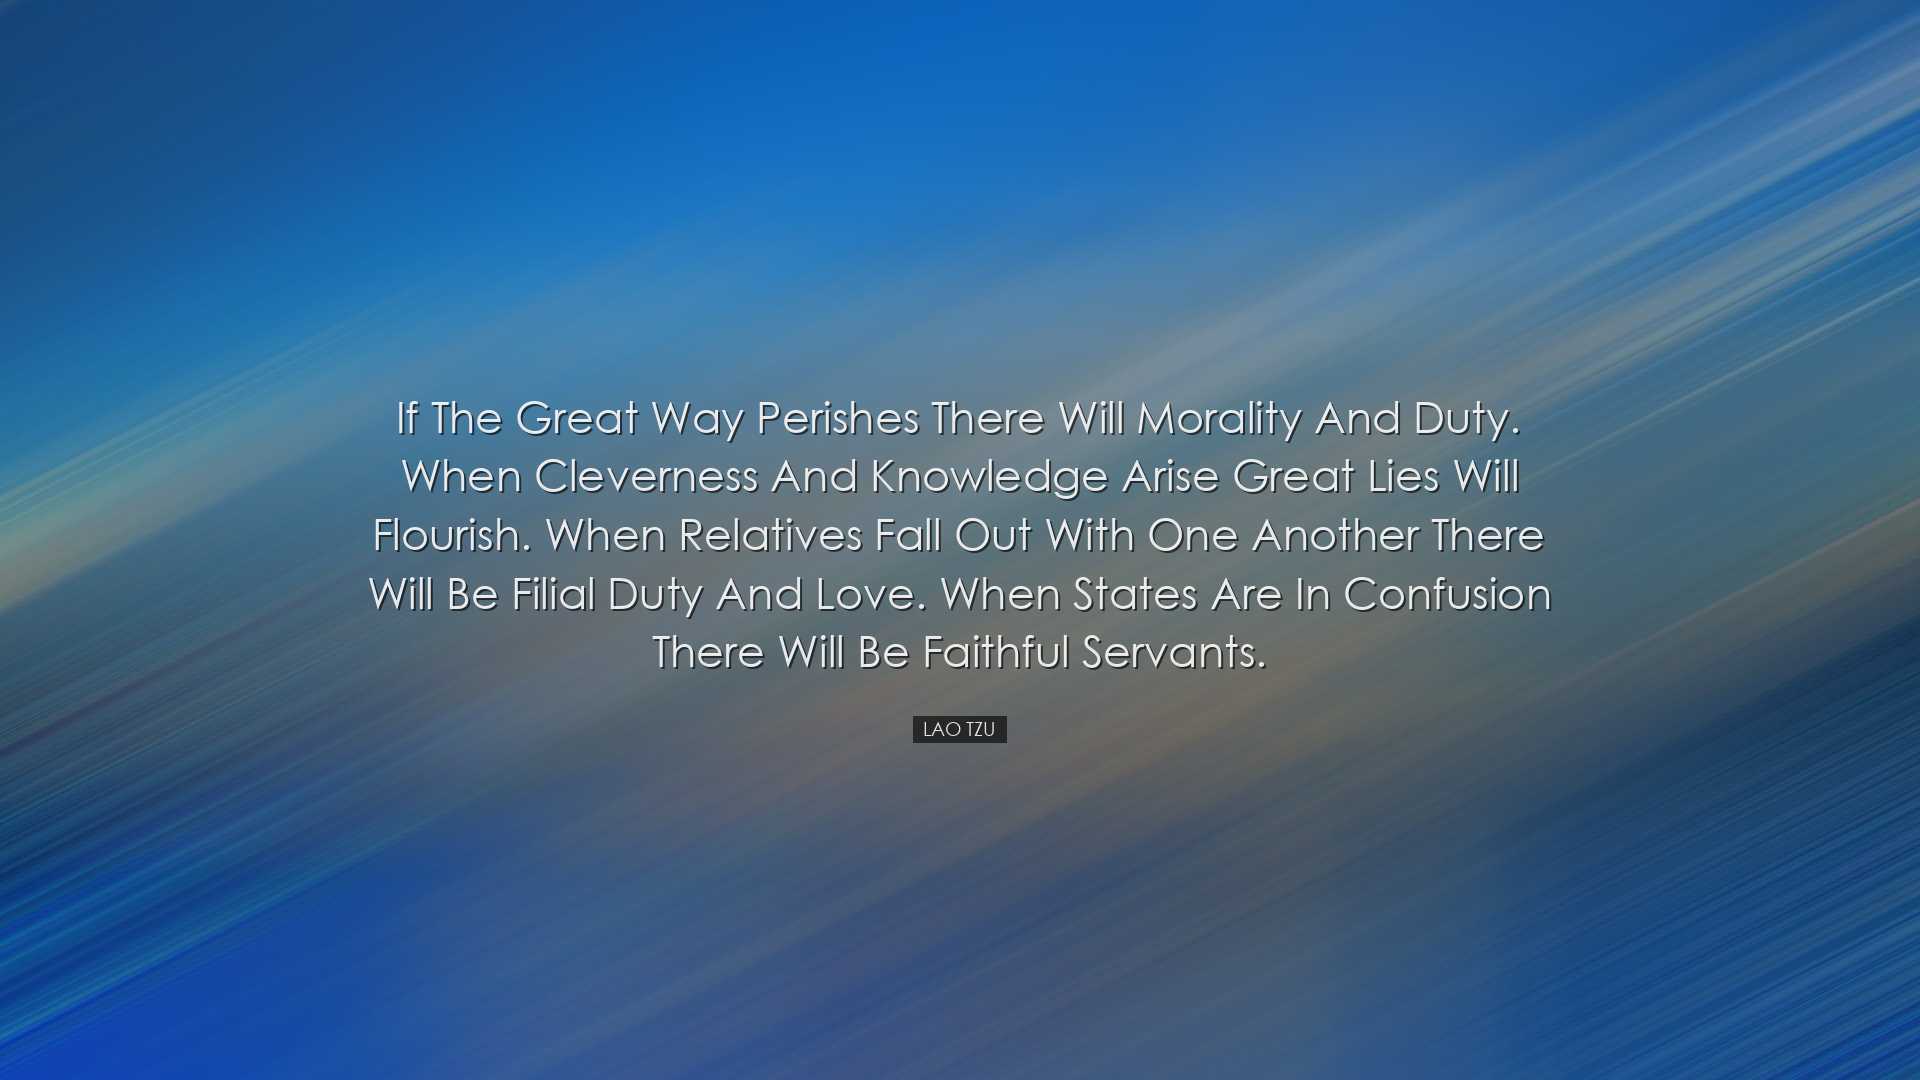 If the Great Way perishes there will morality and duty. When cleve